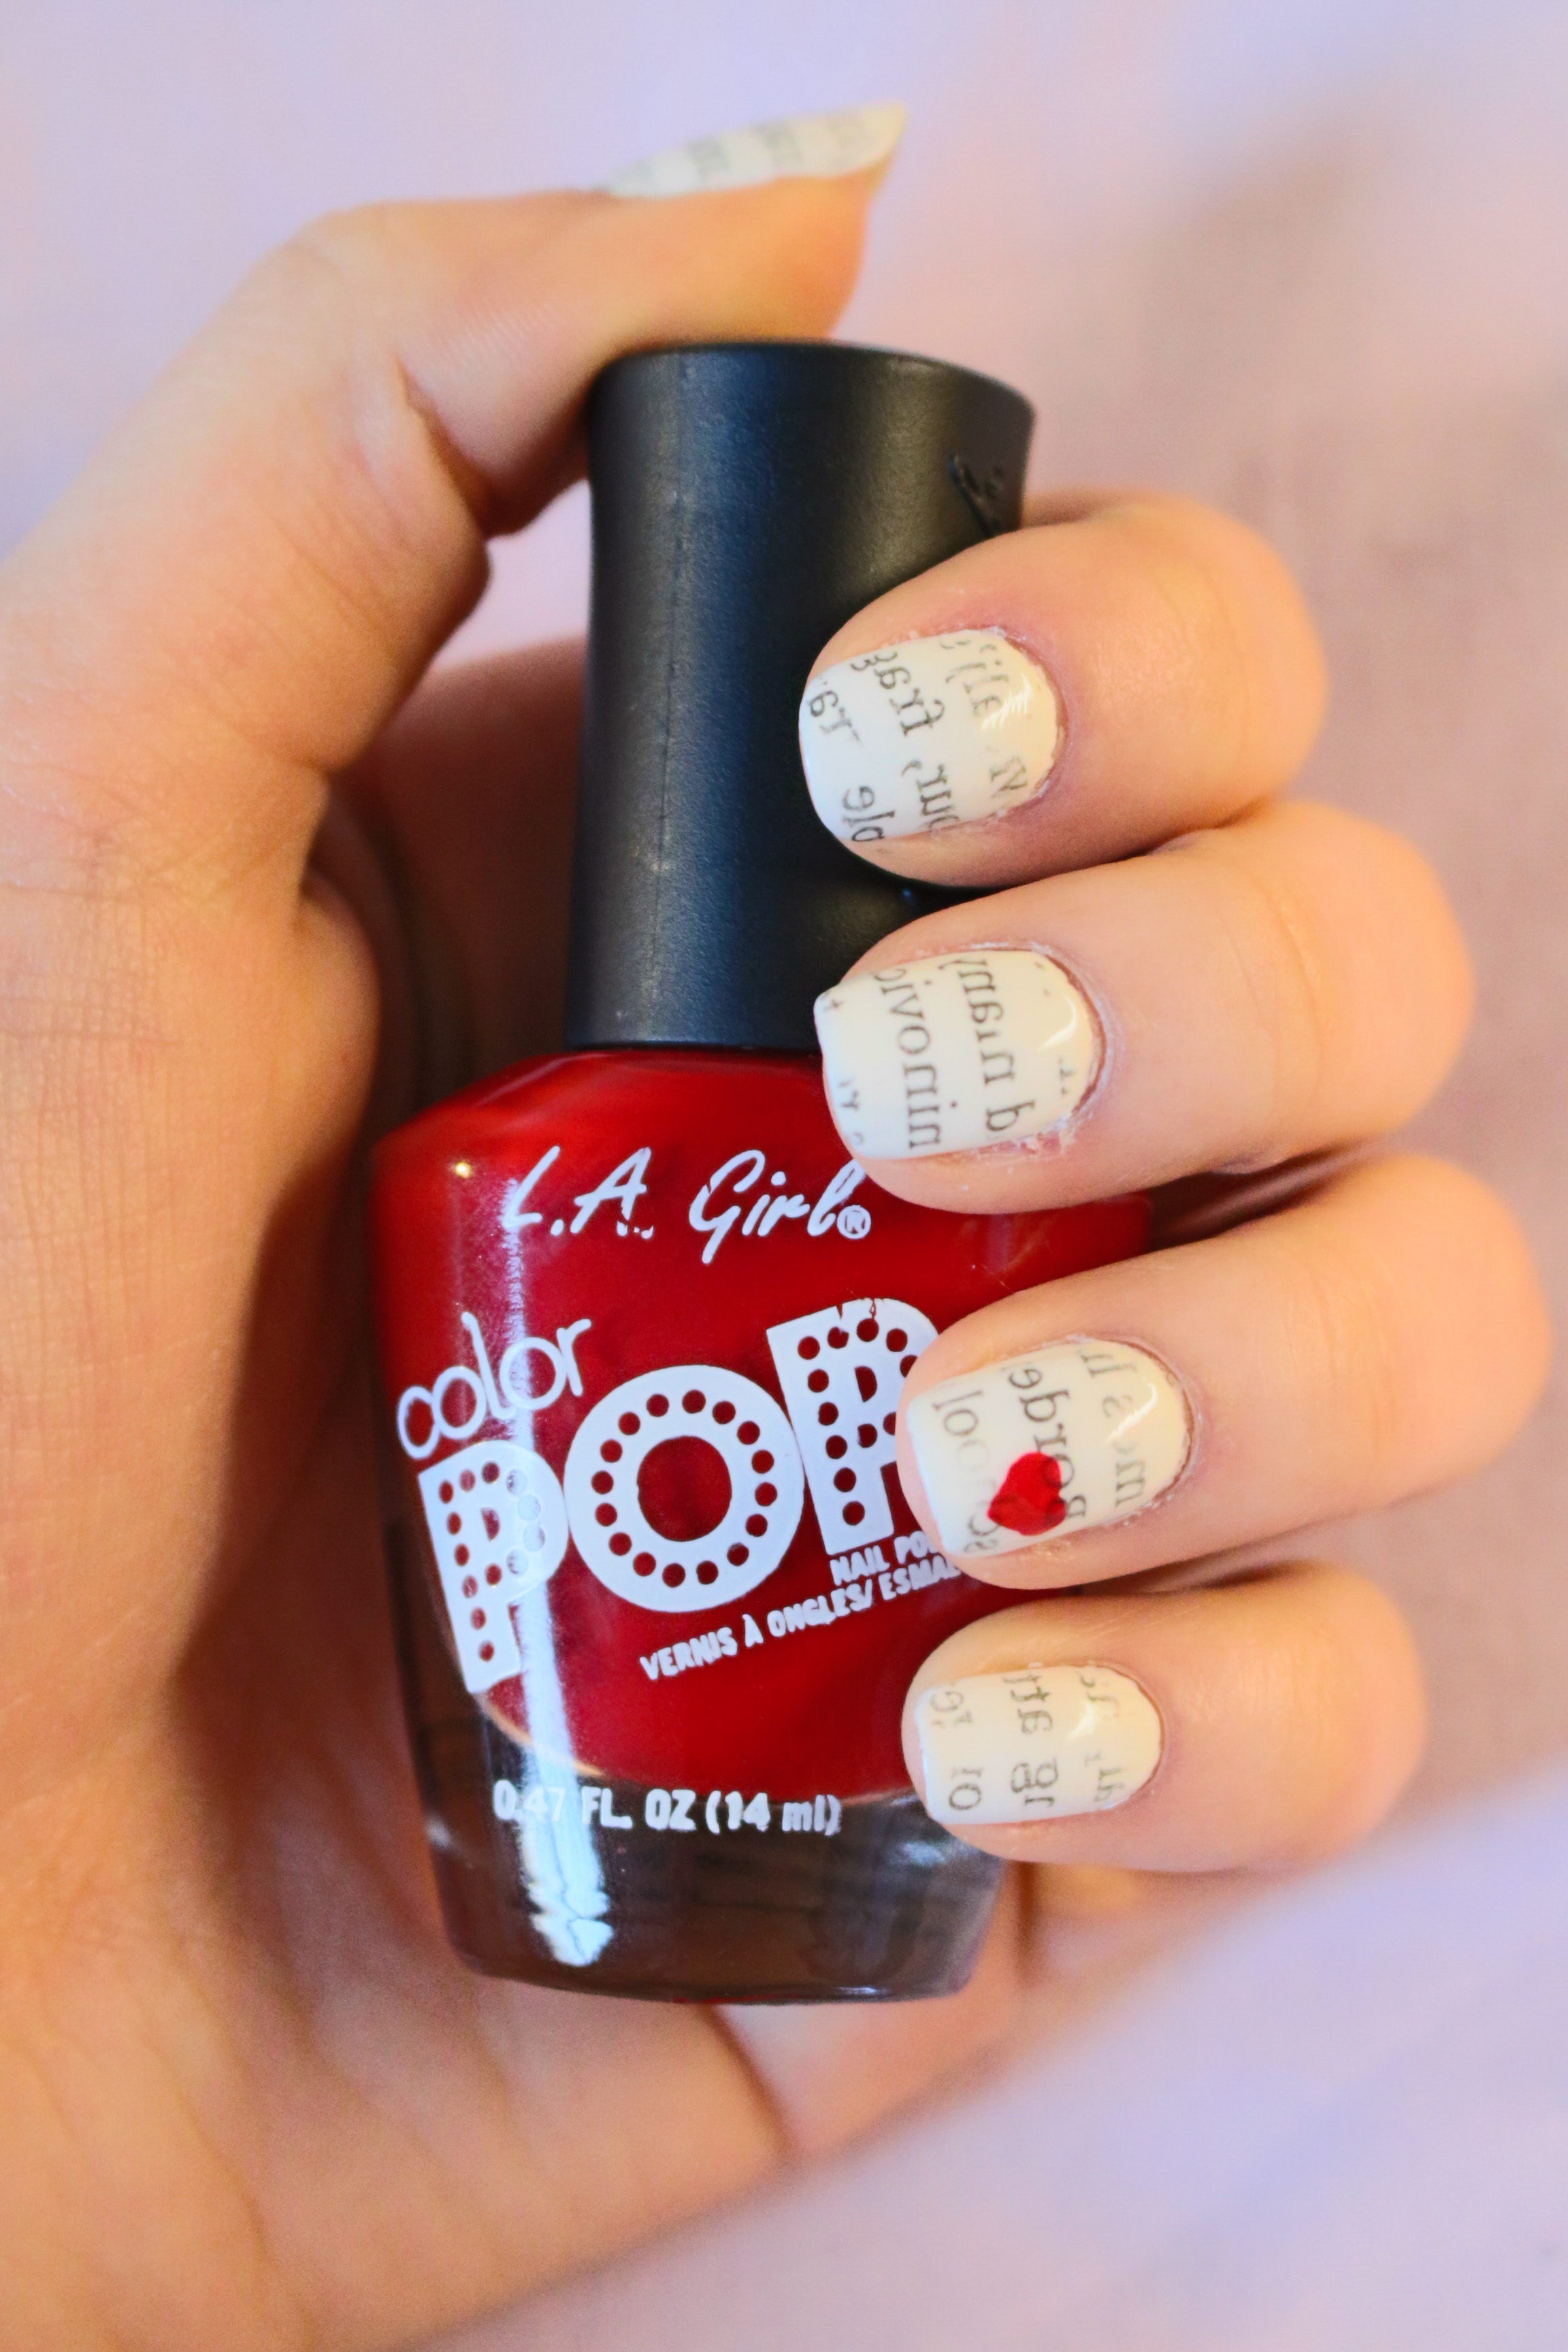 Newspaper Nails | Just a Few Things Beauty!